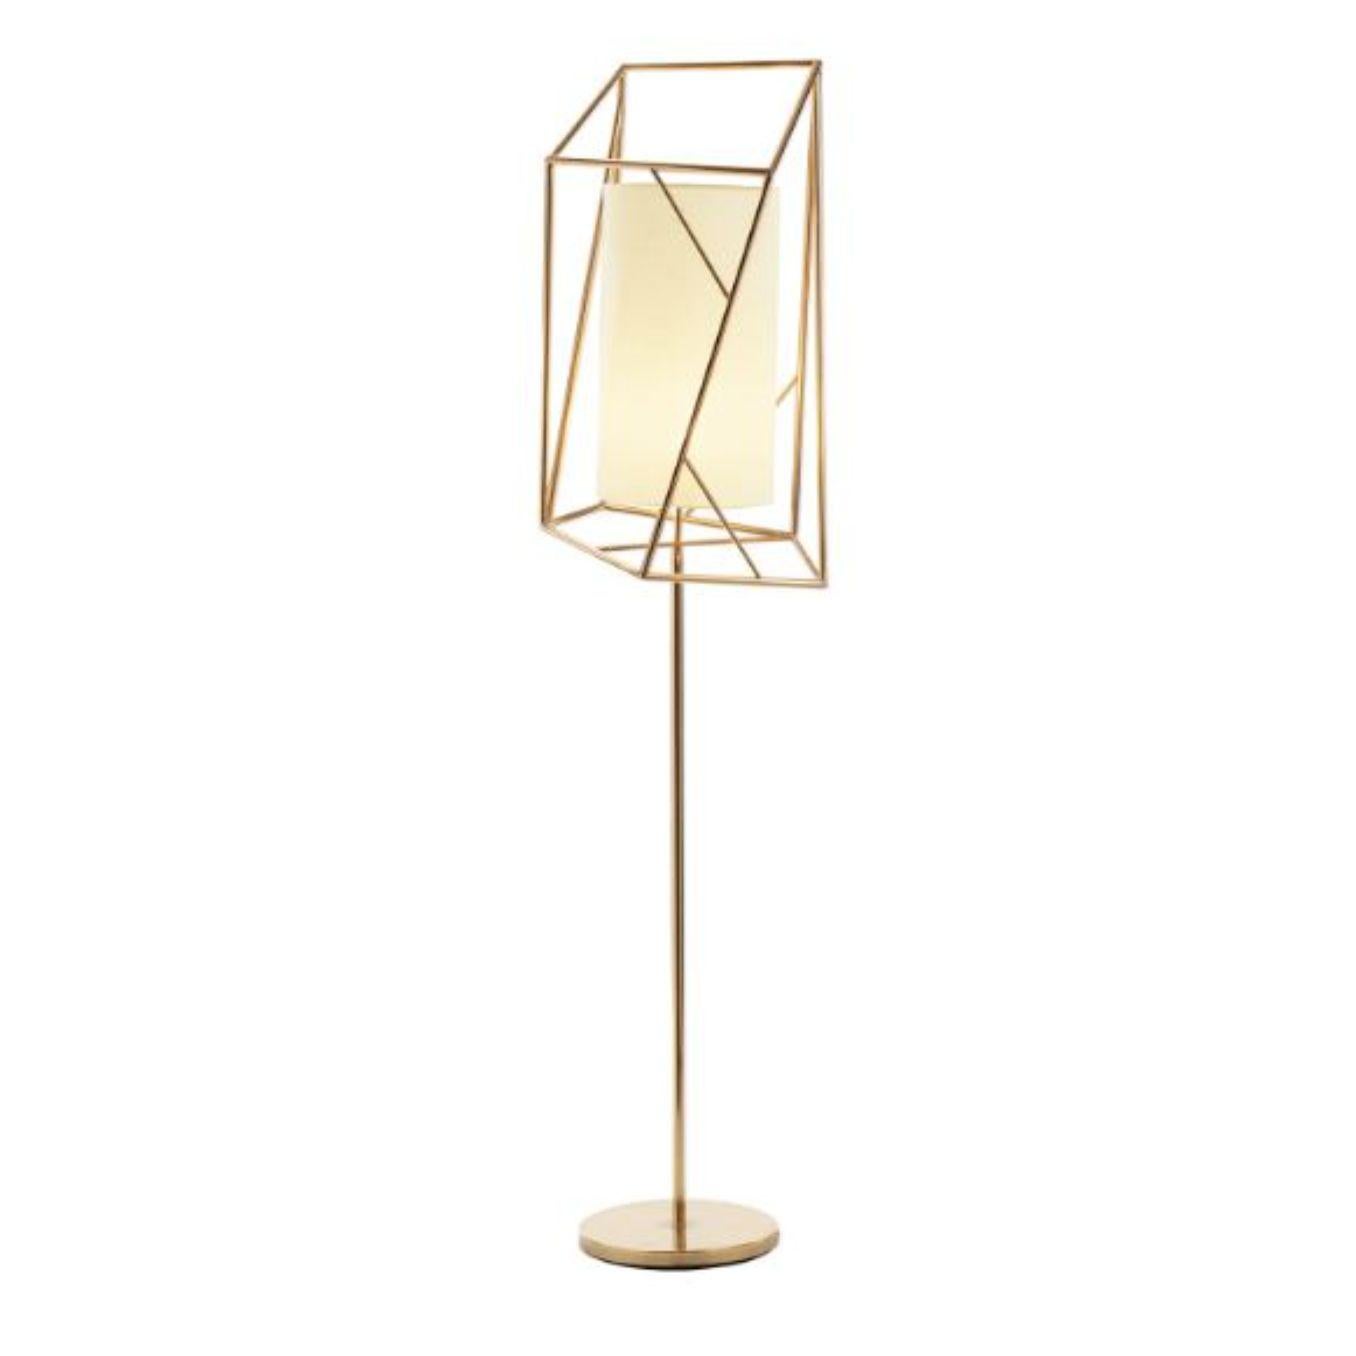 Brass star floor lamp by Dooq
Dimensions: W 45 x D 45 x H 170 cm
Materials: lacquered metal, polished or satin metal, brass.
Abat-jour: linen
Also available in different colors and materials.

Information:
230V/50Hz
E27/1x20W